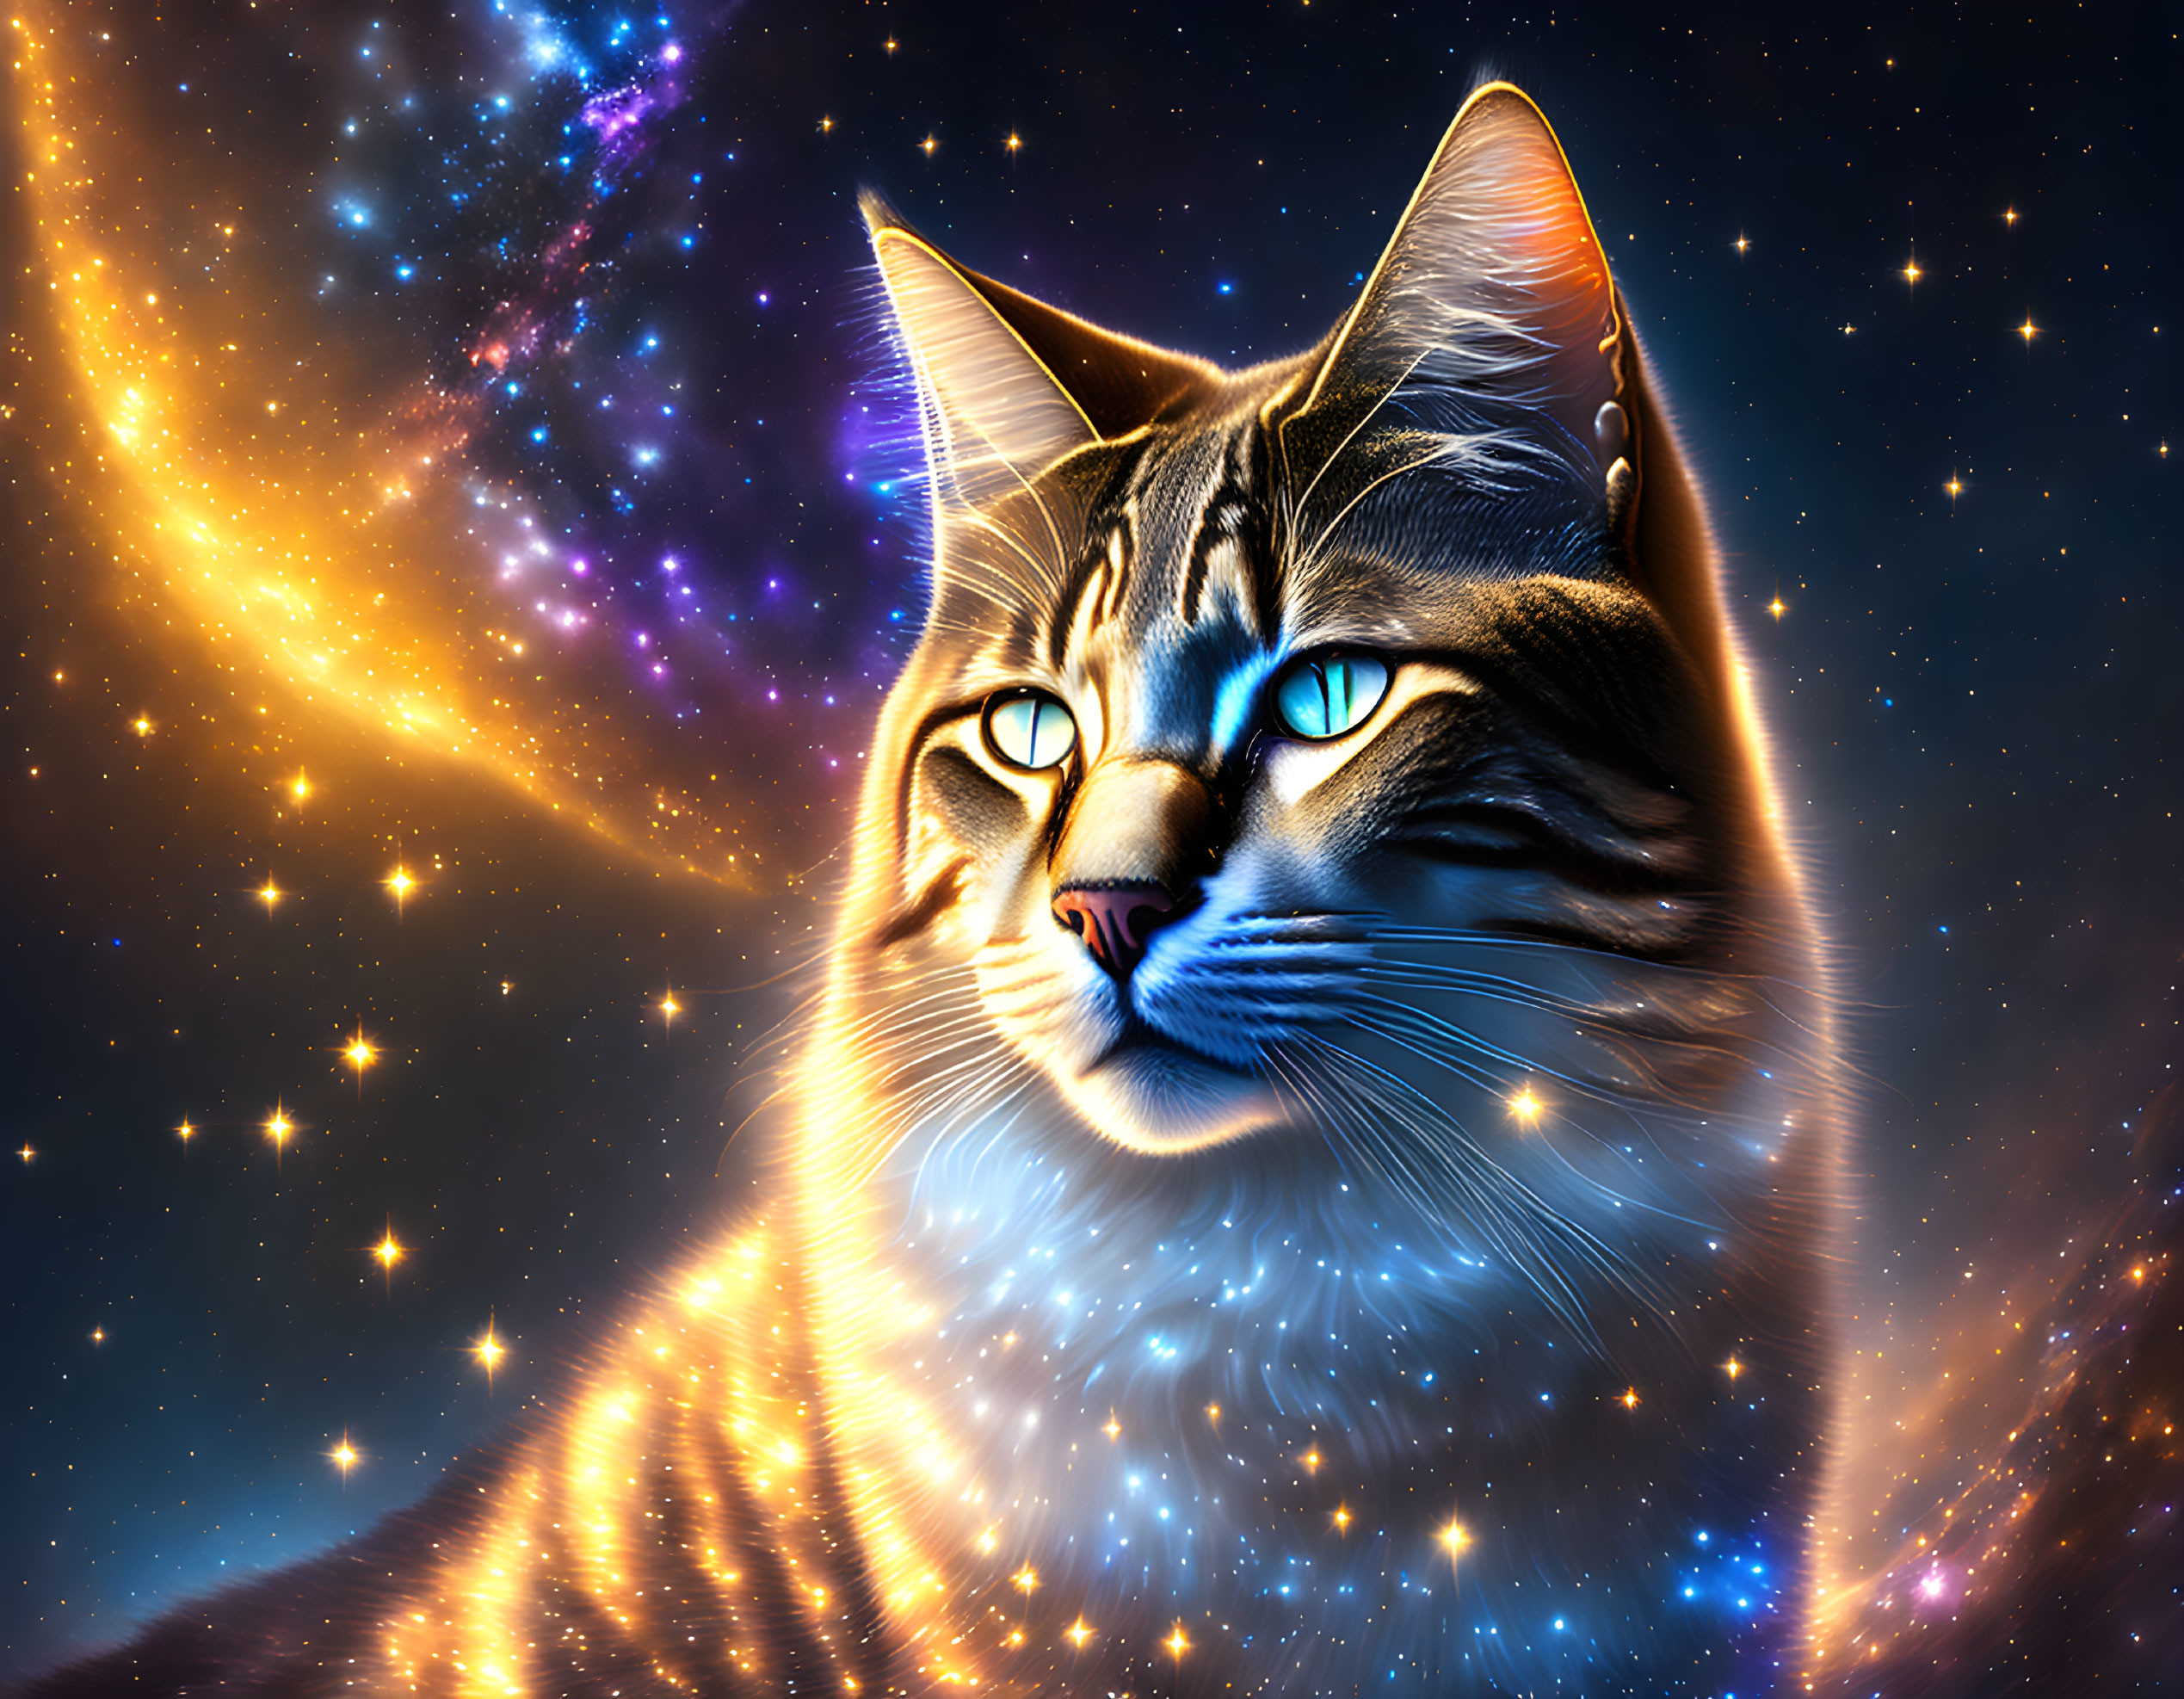 Blue-eyed cosmic cat blending with starry galaxy background